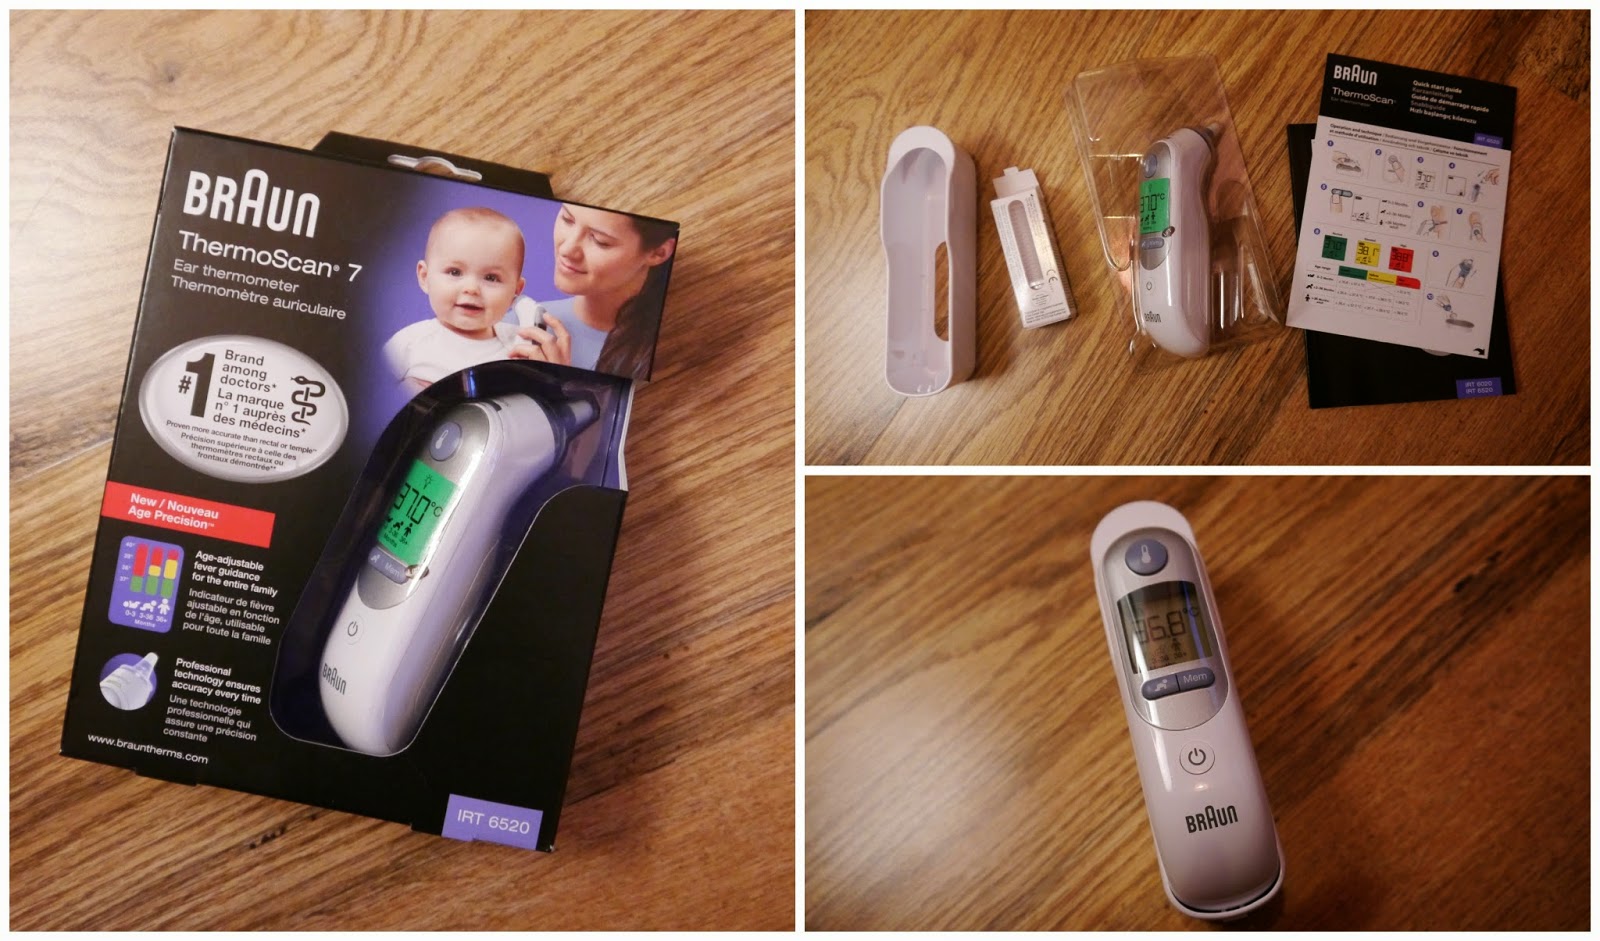 Thermoscan 7 With Age Precision Ear Thermometer